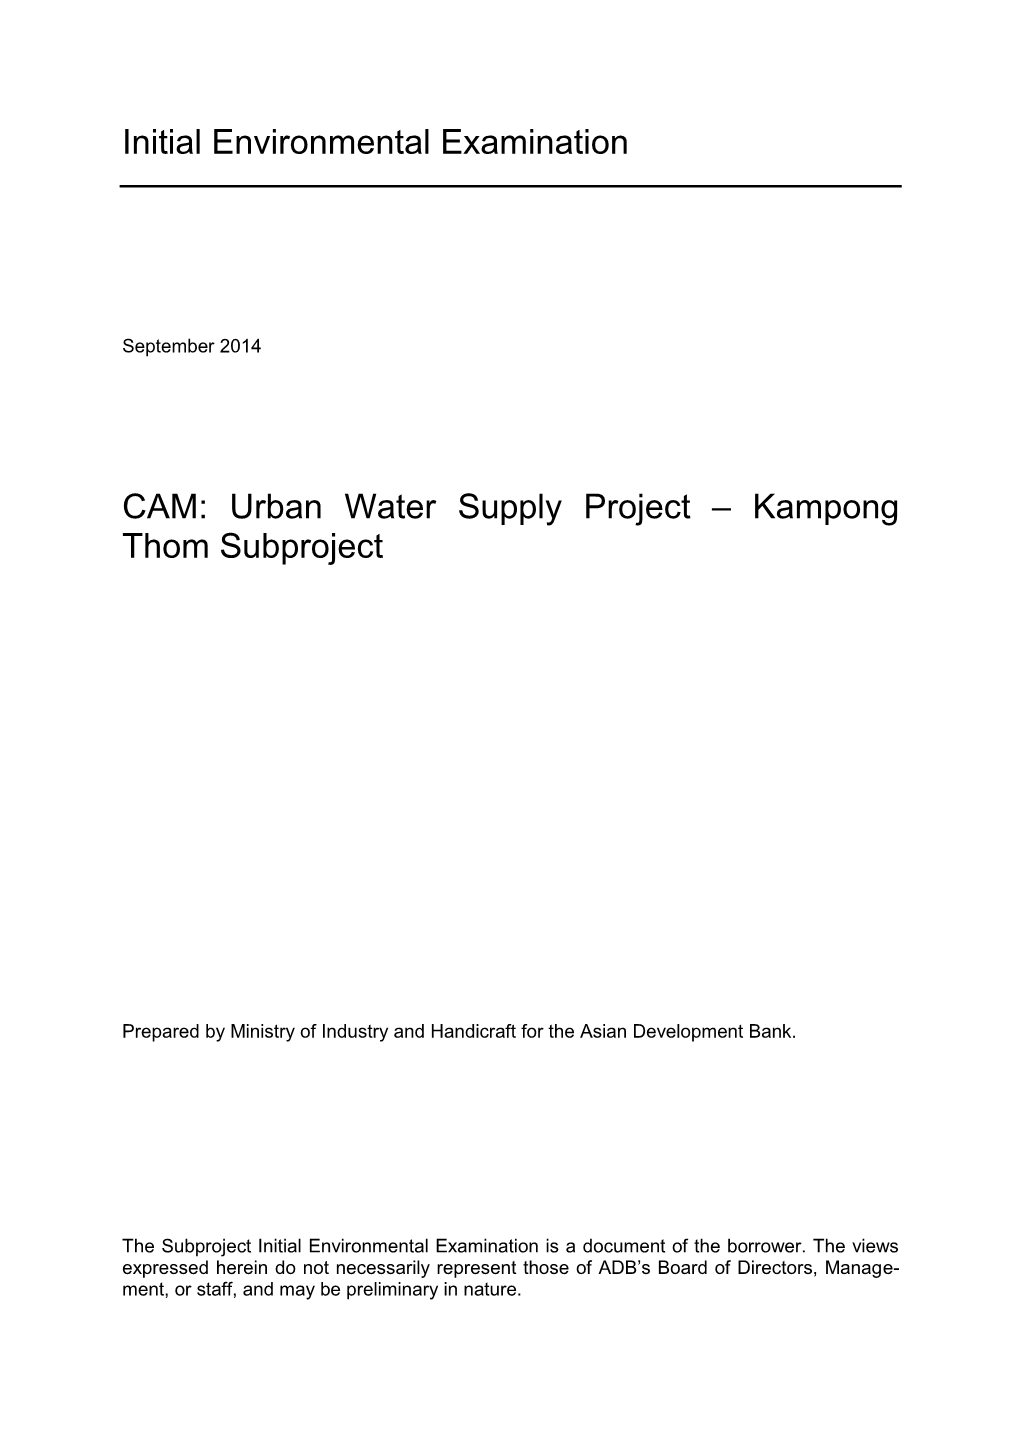 Urban Water Supply Project: Kampong Thom Subproject